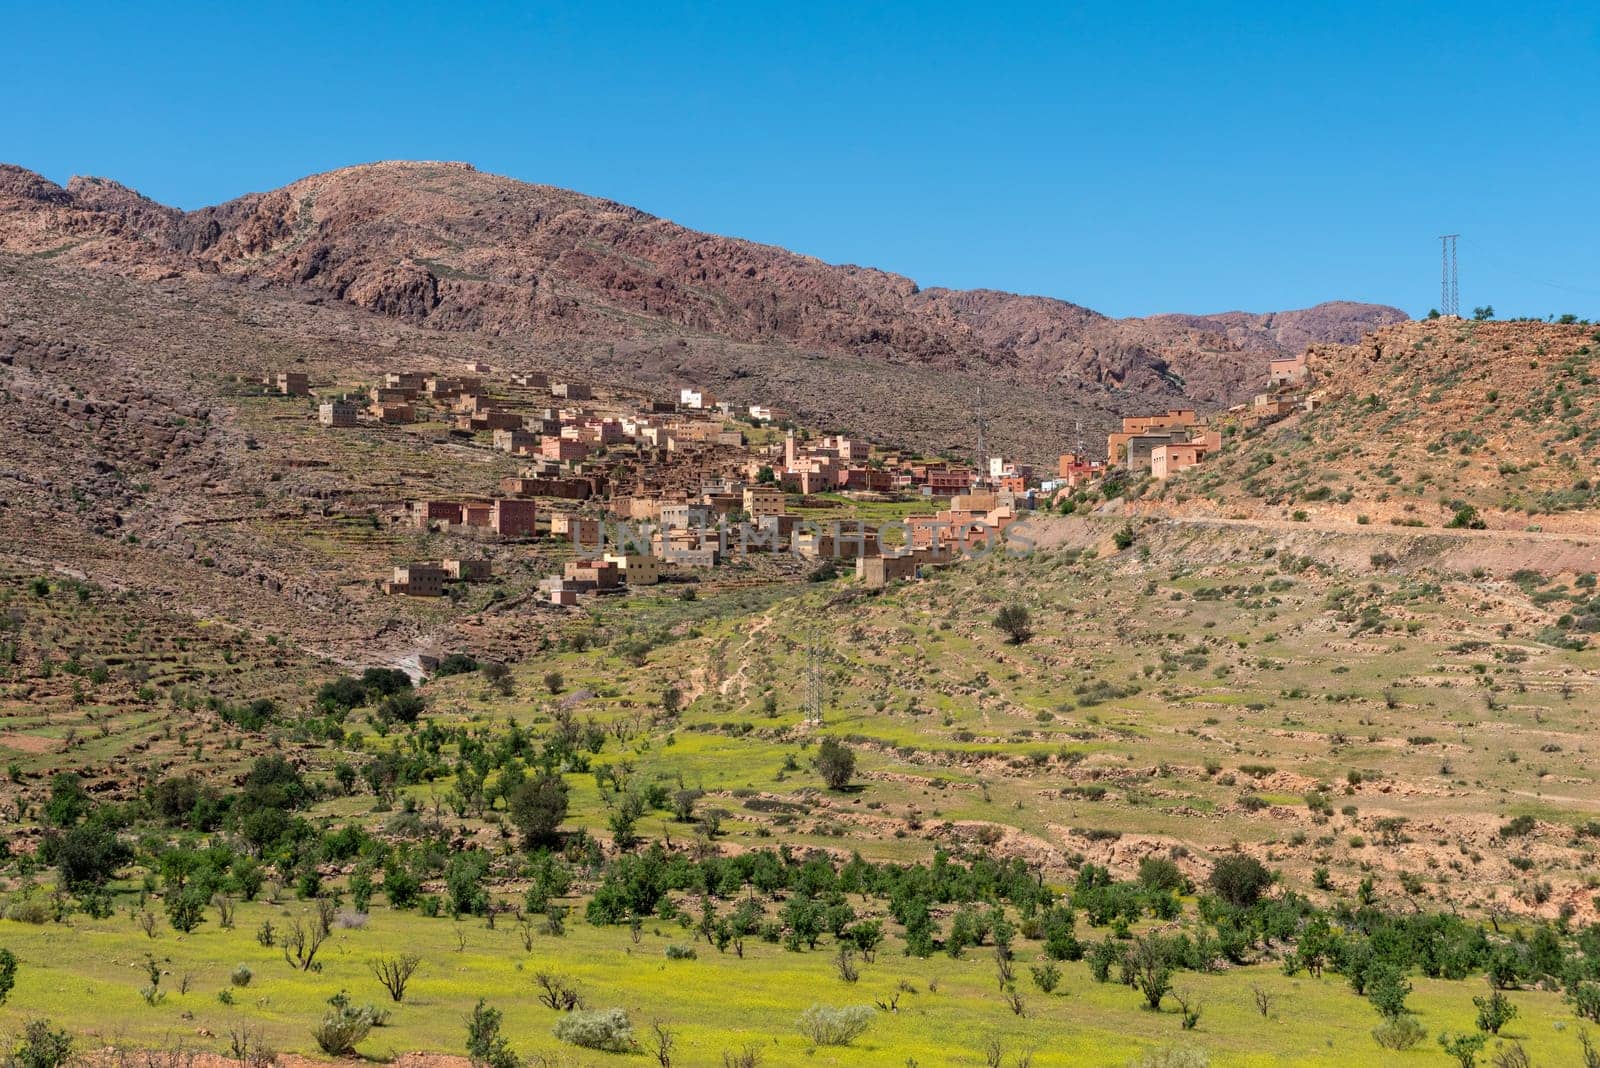 A small village in the Anti-Atlas mountains in Morocco